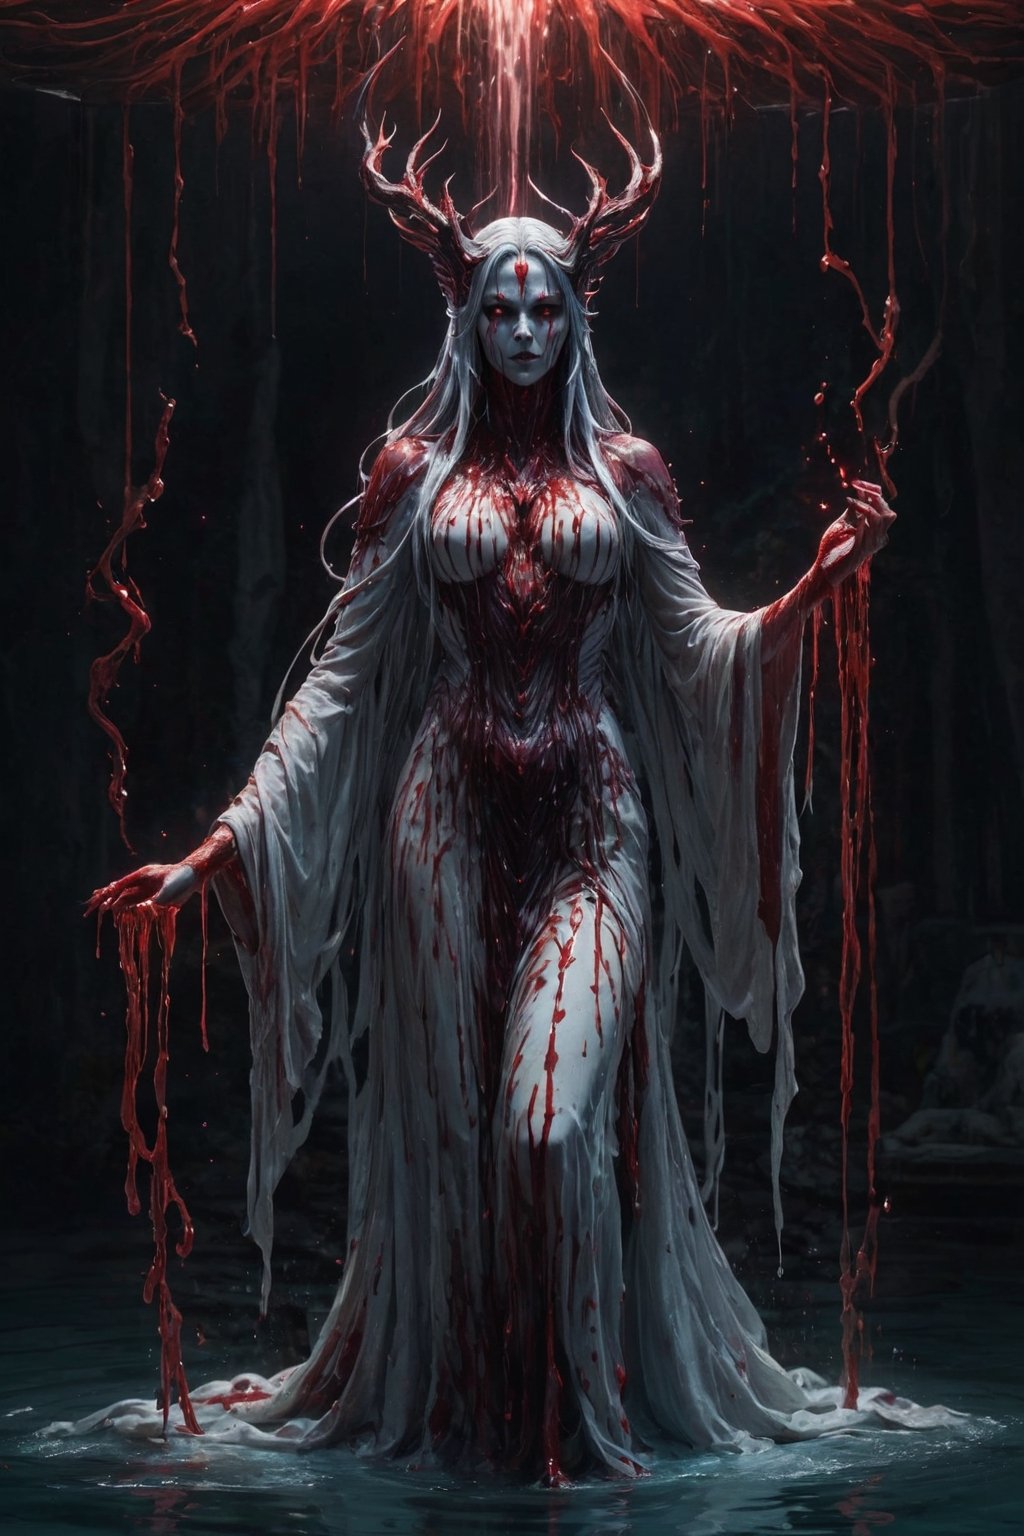 Generate hyper realistic image of a Persian vengeful spirit rising from a pool of blood, its ethereal form dripping with the essence of retribution. Illuminate the scene with a haunting red glow, capturing the malevolent energy as the revenant manifests to seek justice or inflict terror upon the living.